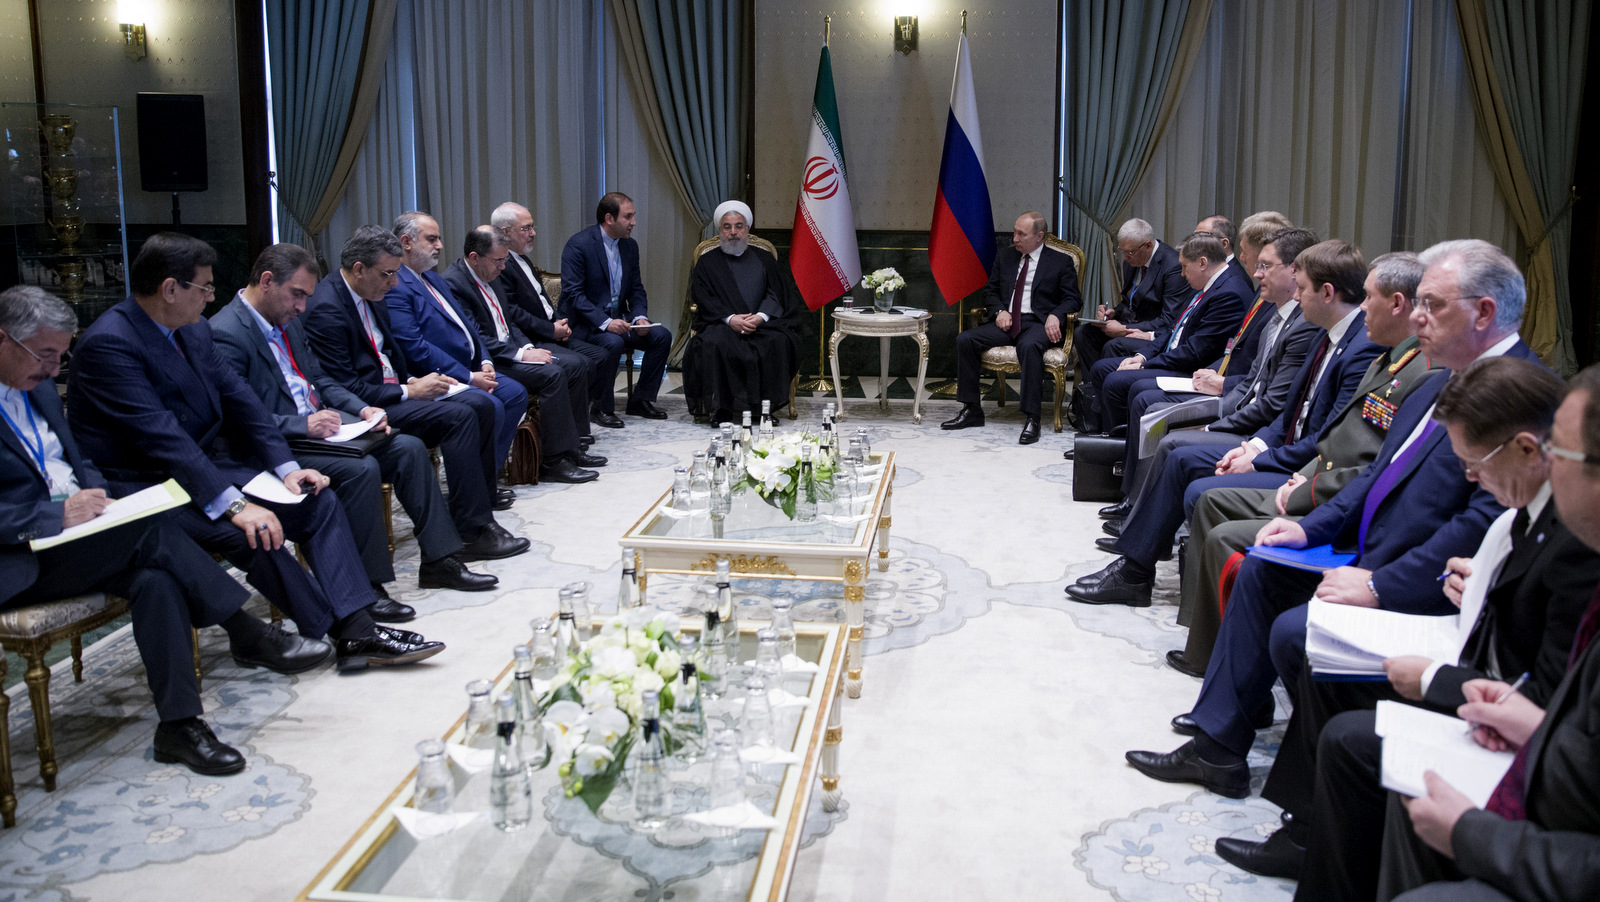 Iran's President Hassan Rouhani, center left, and Russia's President Vladimir Putin, centre right, flanked by their delegations as they speak during a meeting in Ankara, Turkey, Wednesday, April 4, 2018. The leaders of Russia, Iran and Turkey are meeting in the Turkish capital for talks on Syria's future. The leaders are expected to reaffirm their commitment to Syria's territorial integrity and the continuation of local cease-fires when they meet Wednesday. (Tolga Bozoglu/Pool Photo via AP)